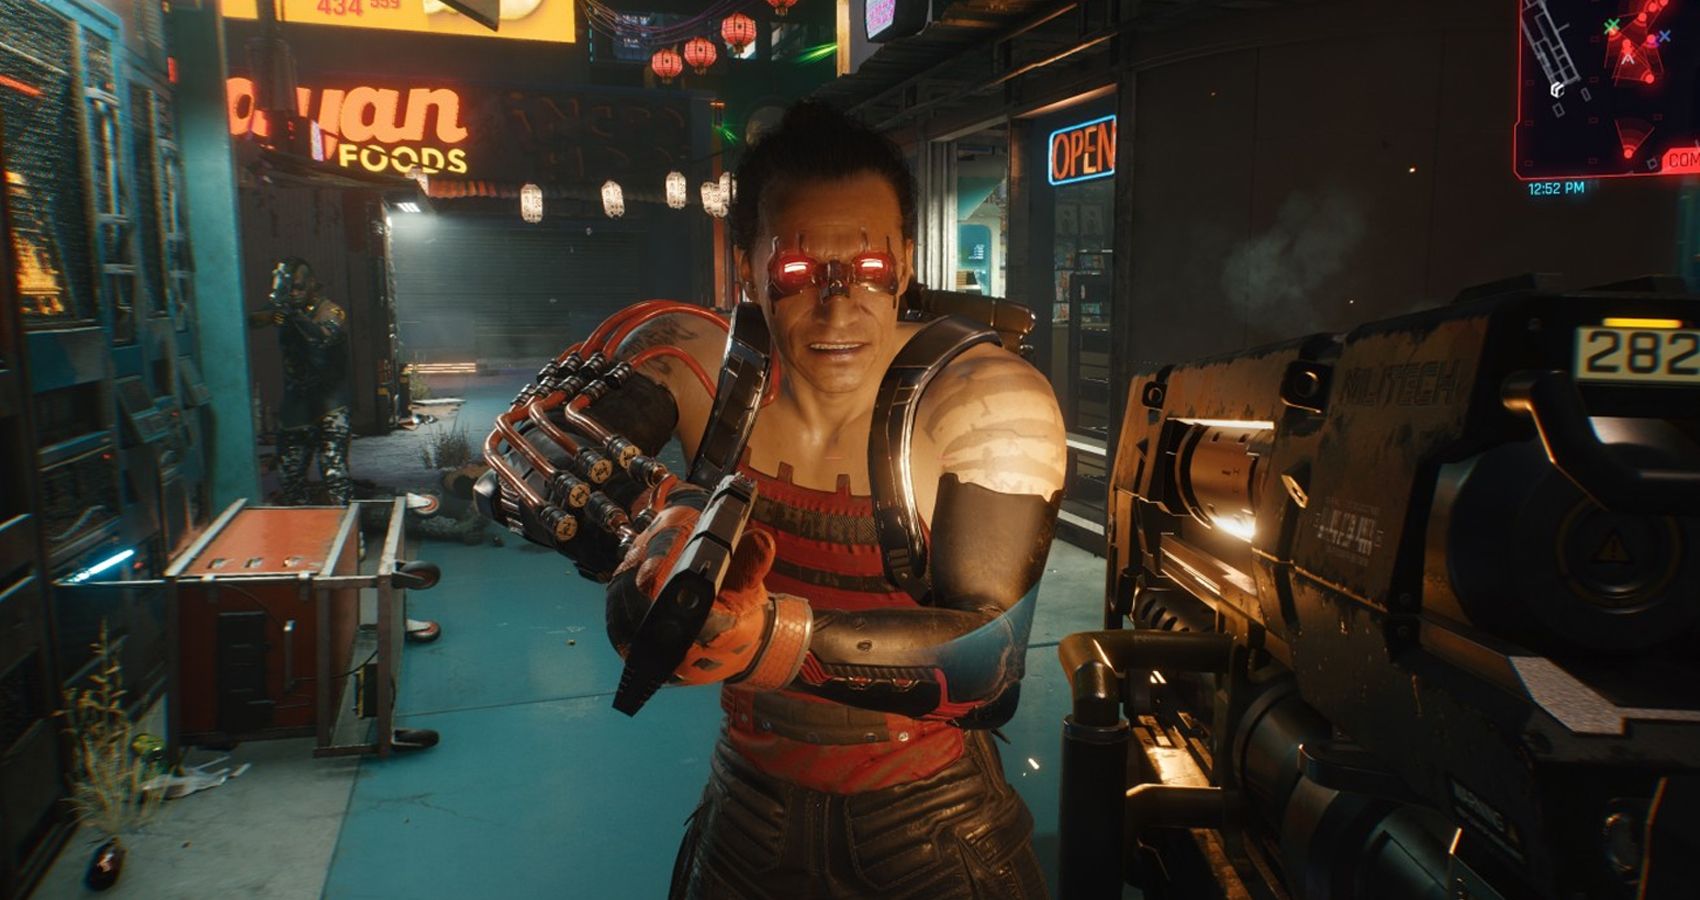 Psa Cyberpunk 2077 On Pc Probably Isn T Using The Full Power Of Your Gpu Here S How To Fix By now, most people have probably seen or heard about the game's many bugs. psa cyberpunk 2077 on pc probably isn